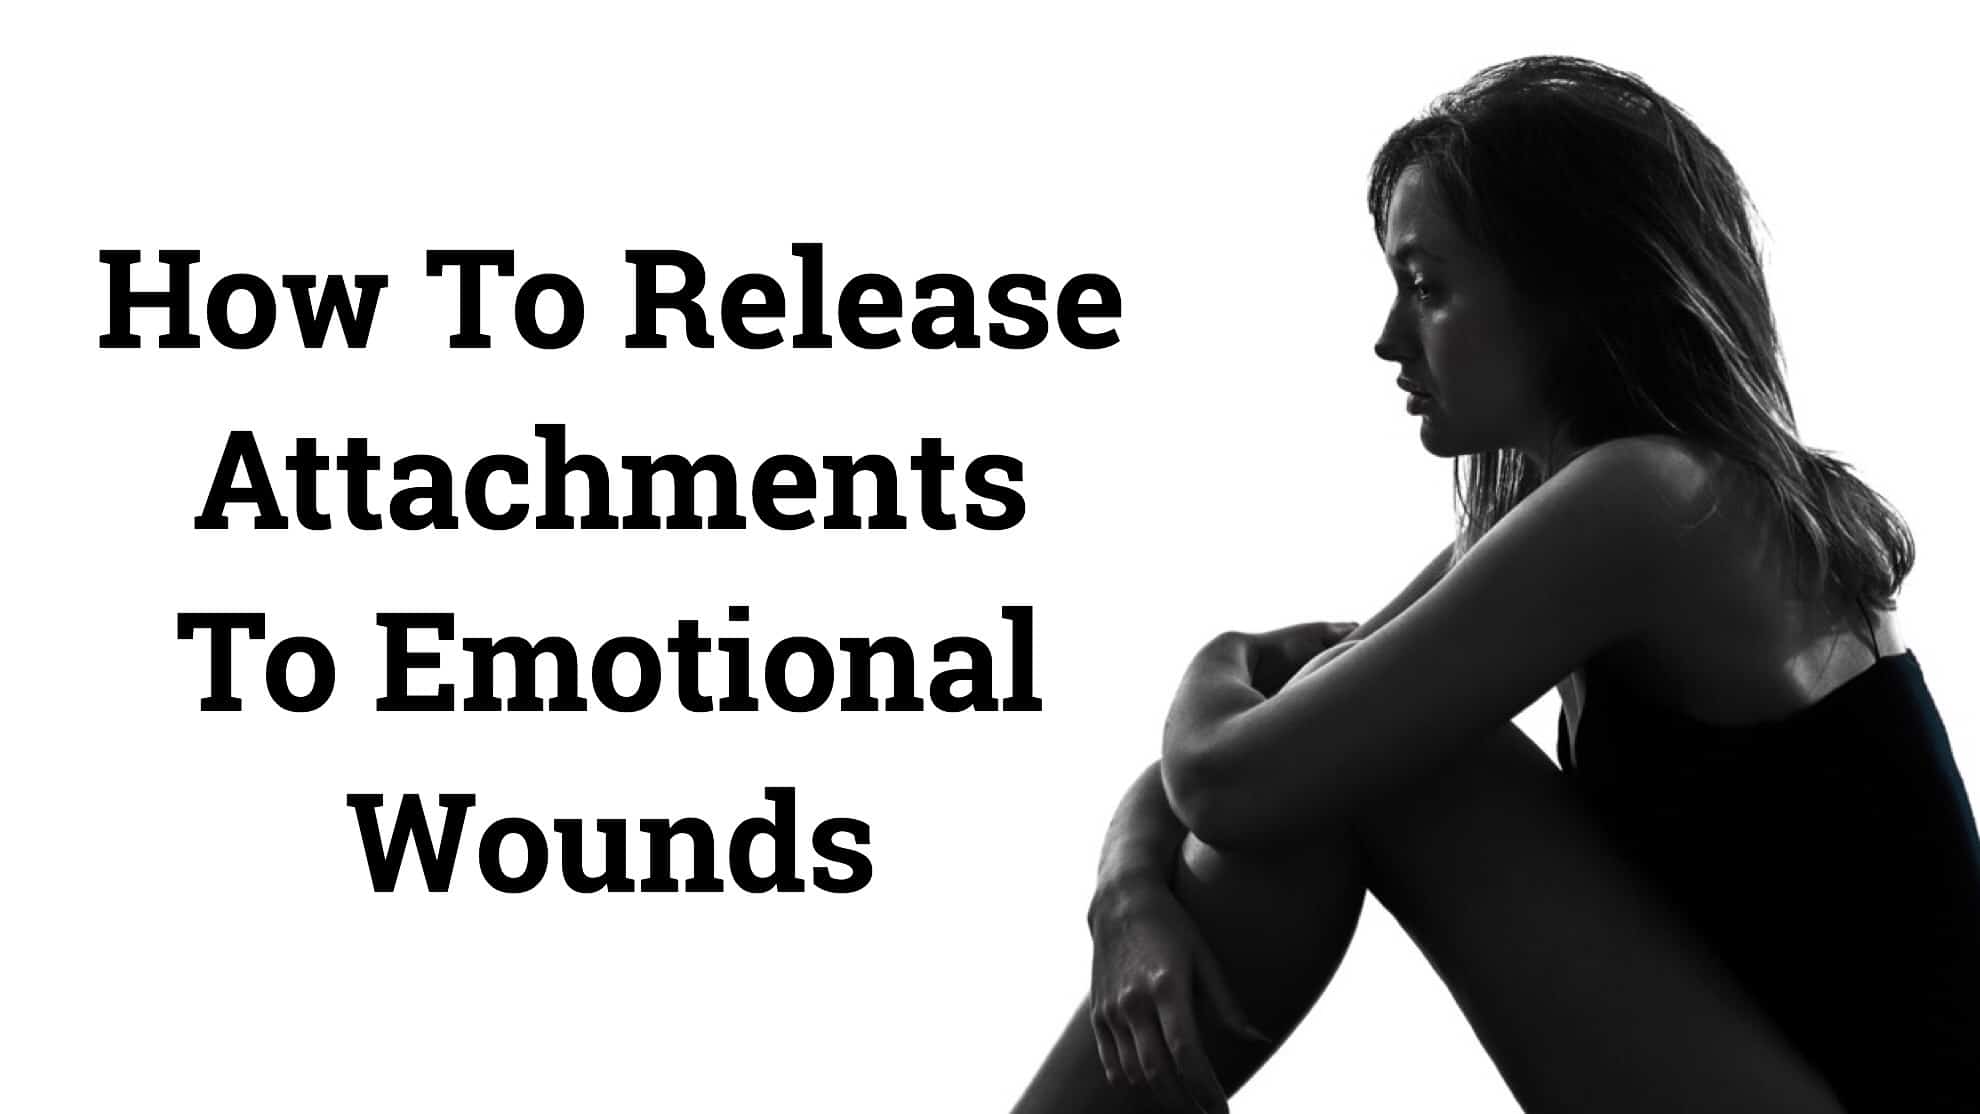 How To Release Attachments To Emotional Wounds